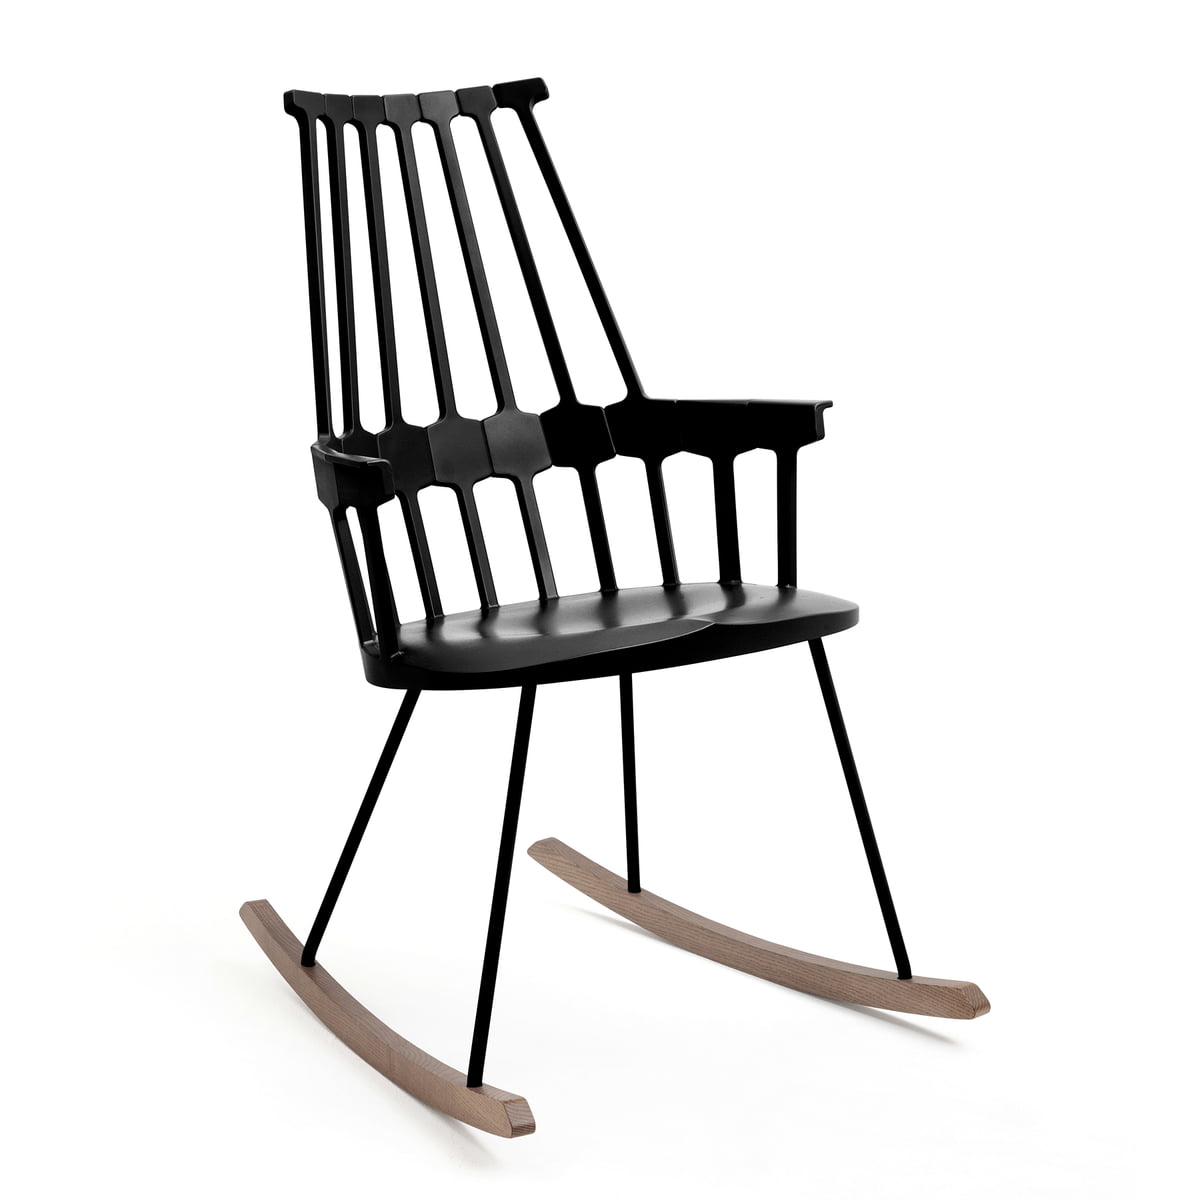 COMBACK ROCKING chair